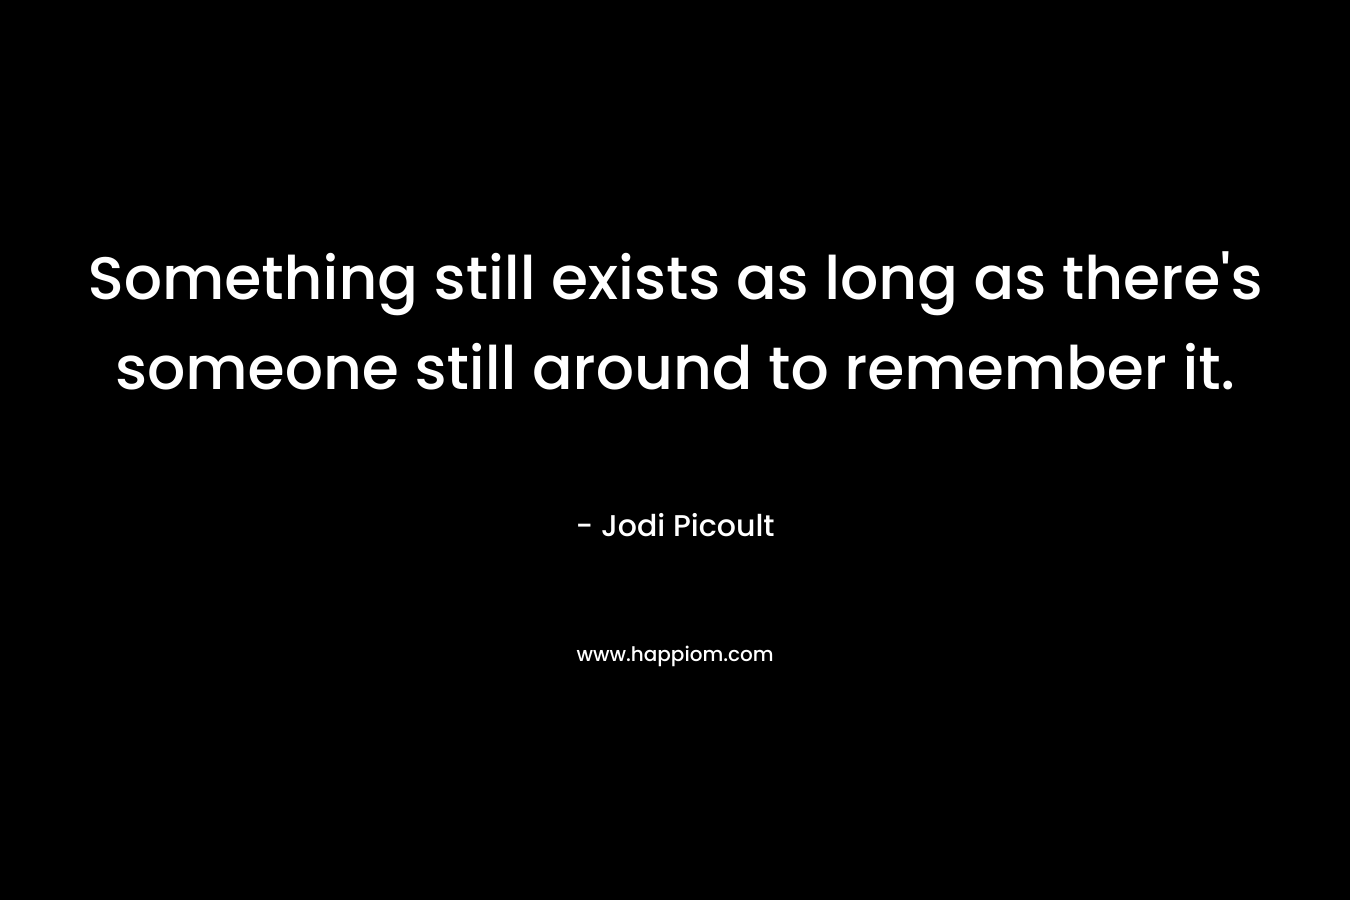 Something still exists as long as there's someone still around to remember it.